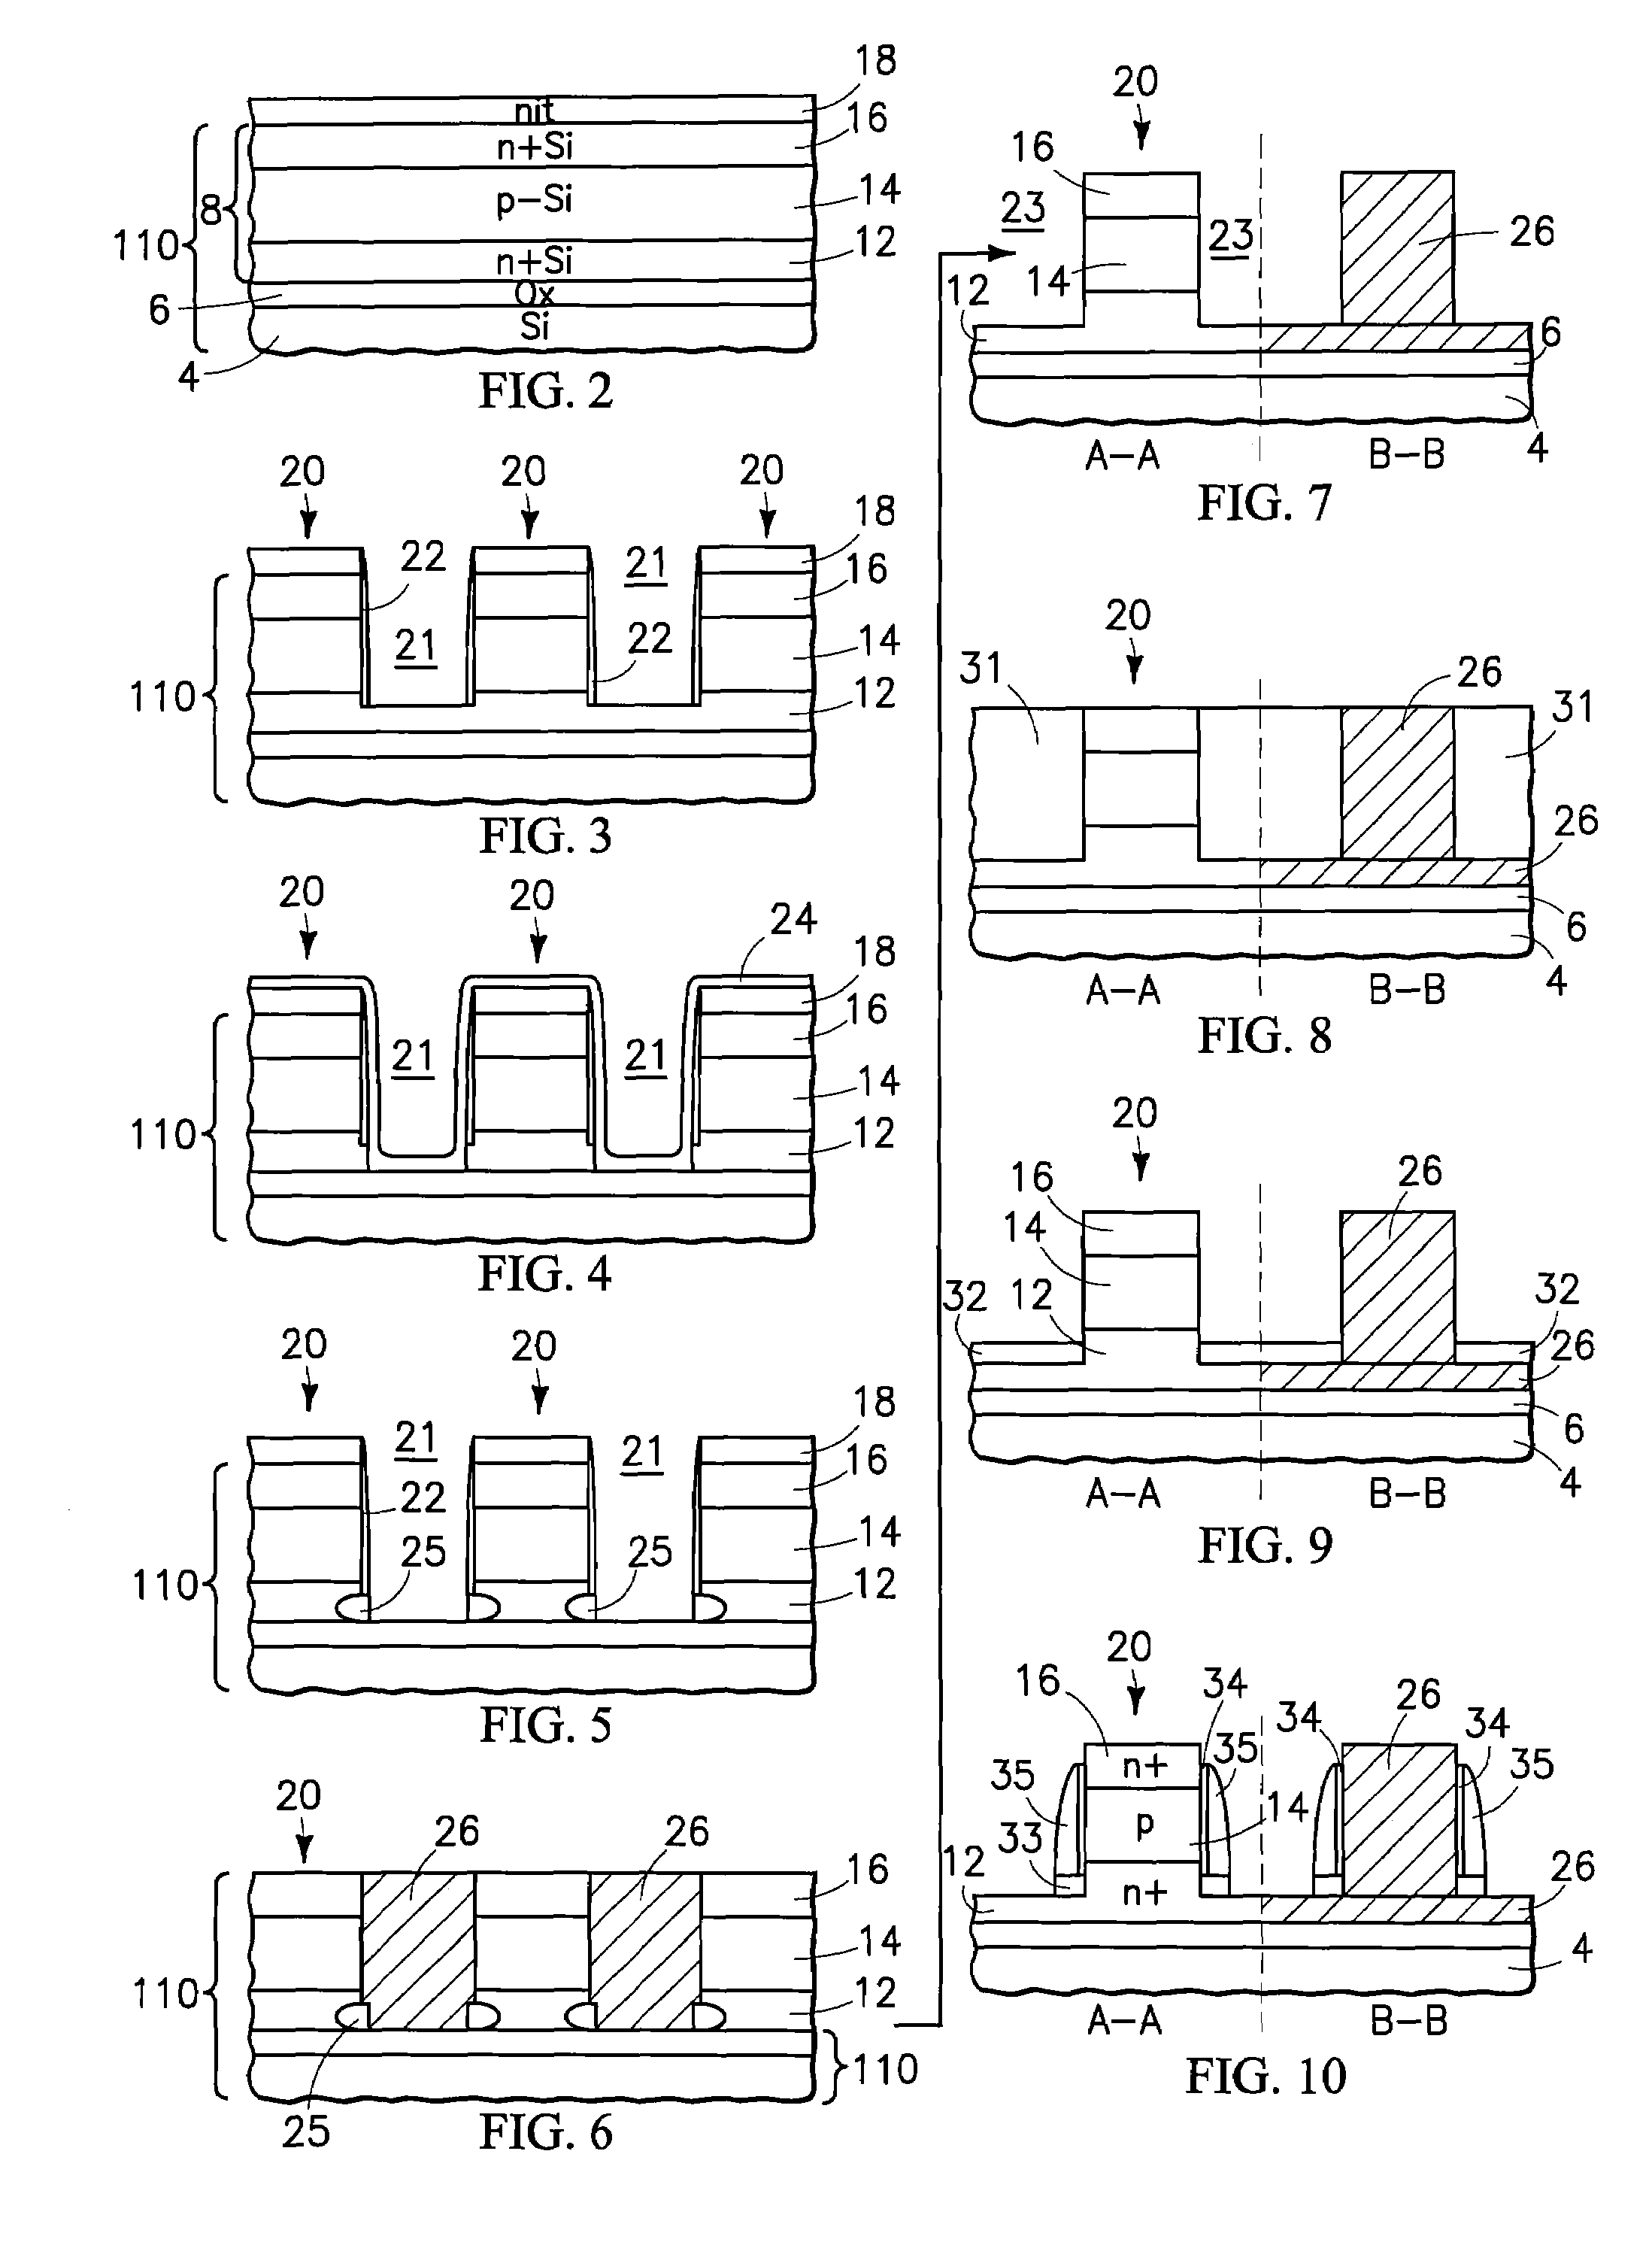 DRAM layout with vertical FETs and method of formation